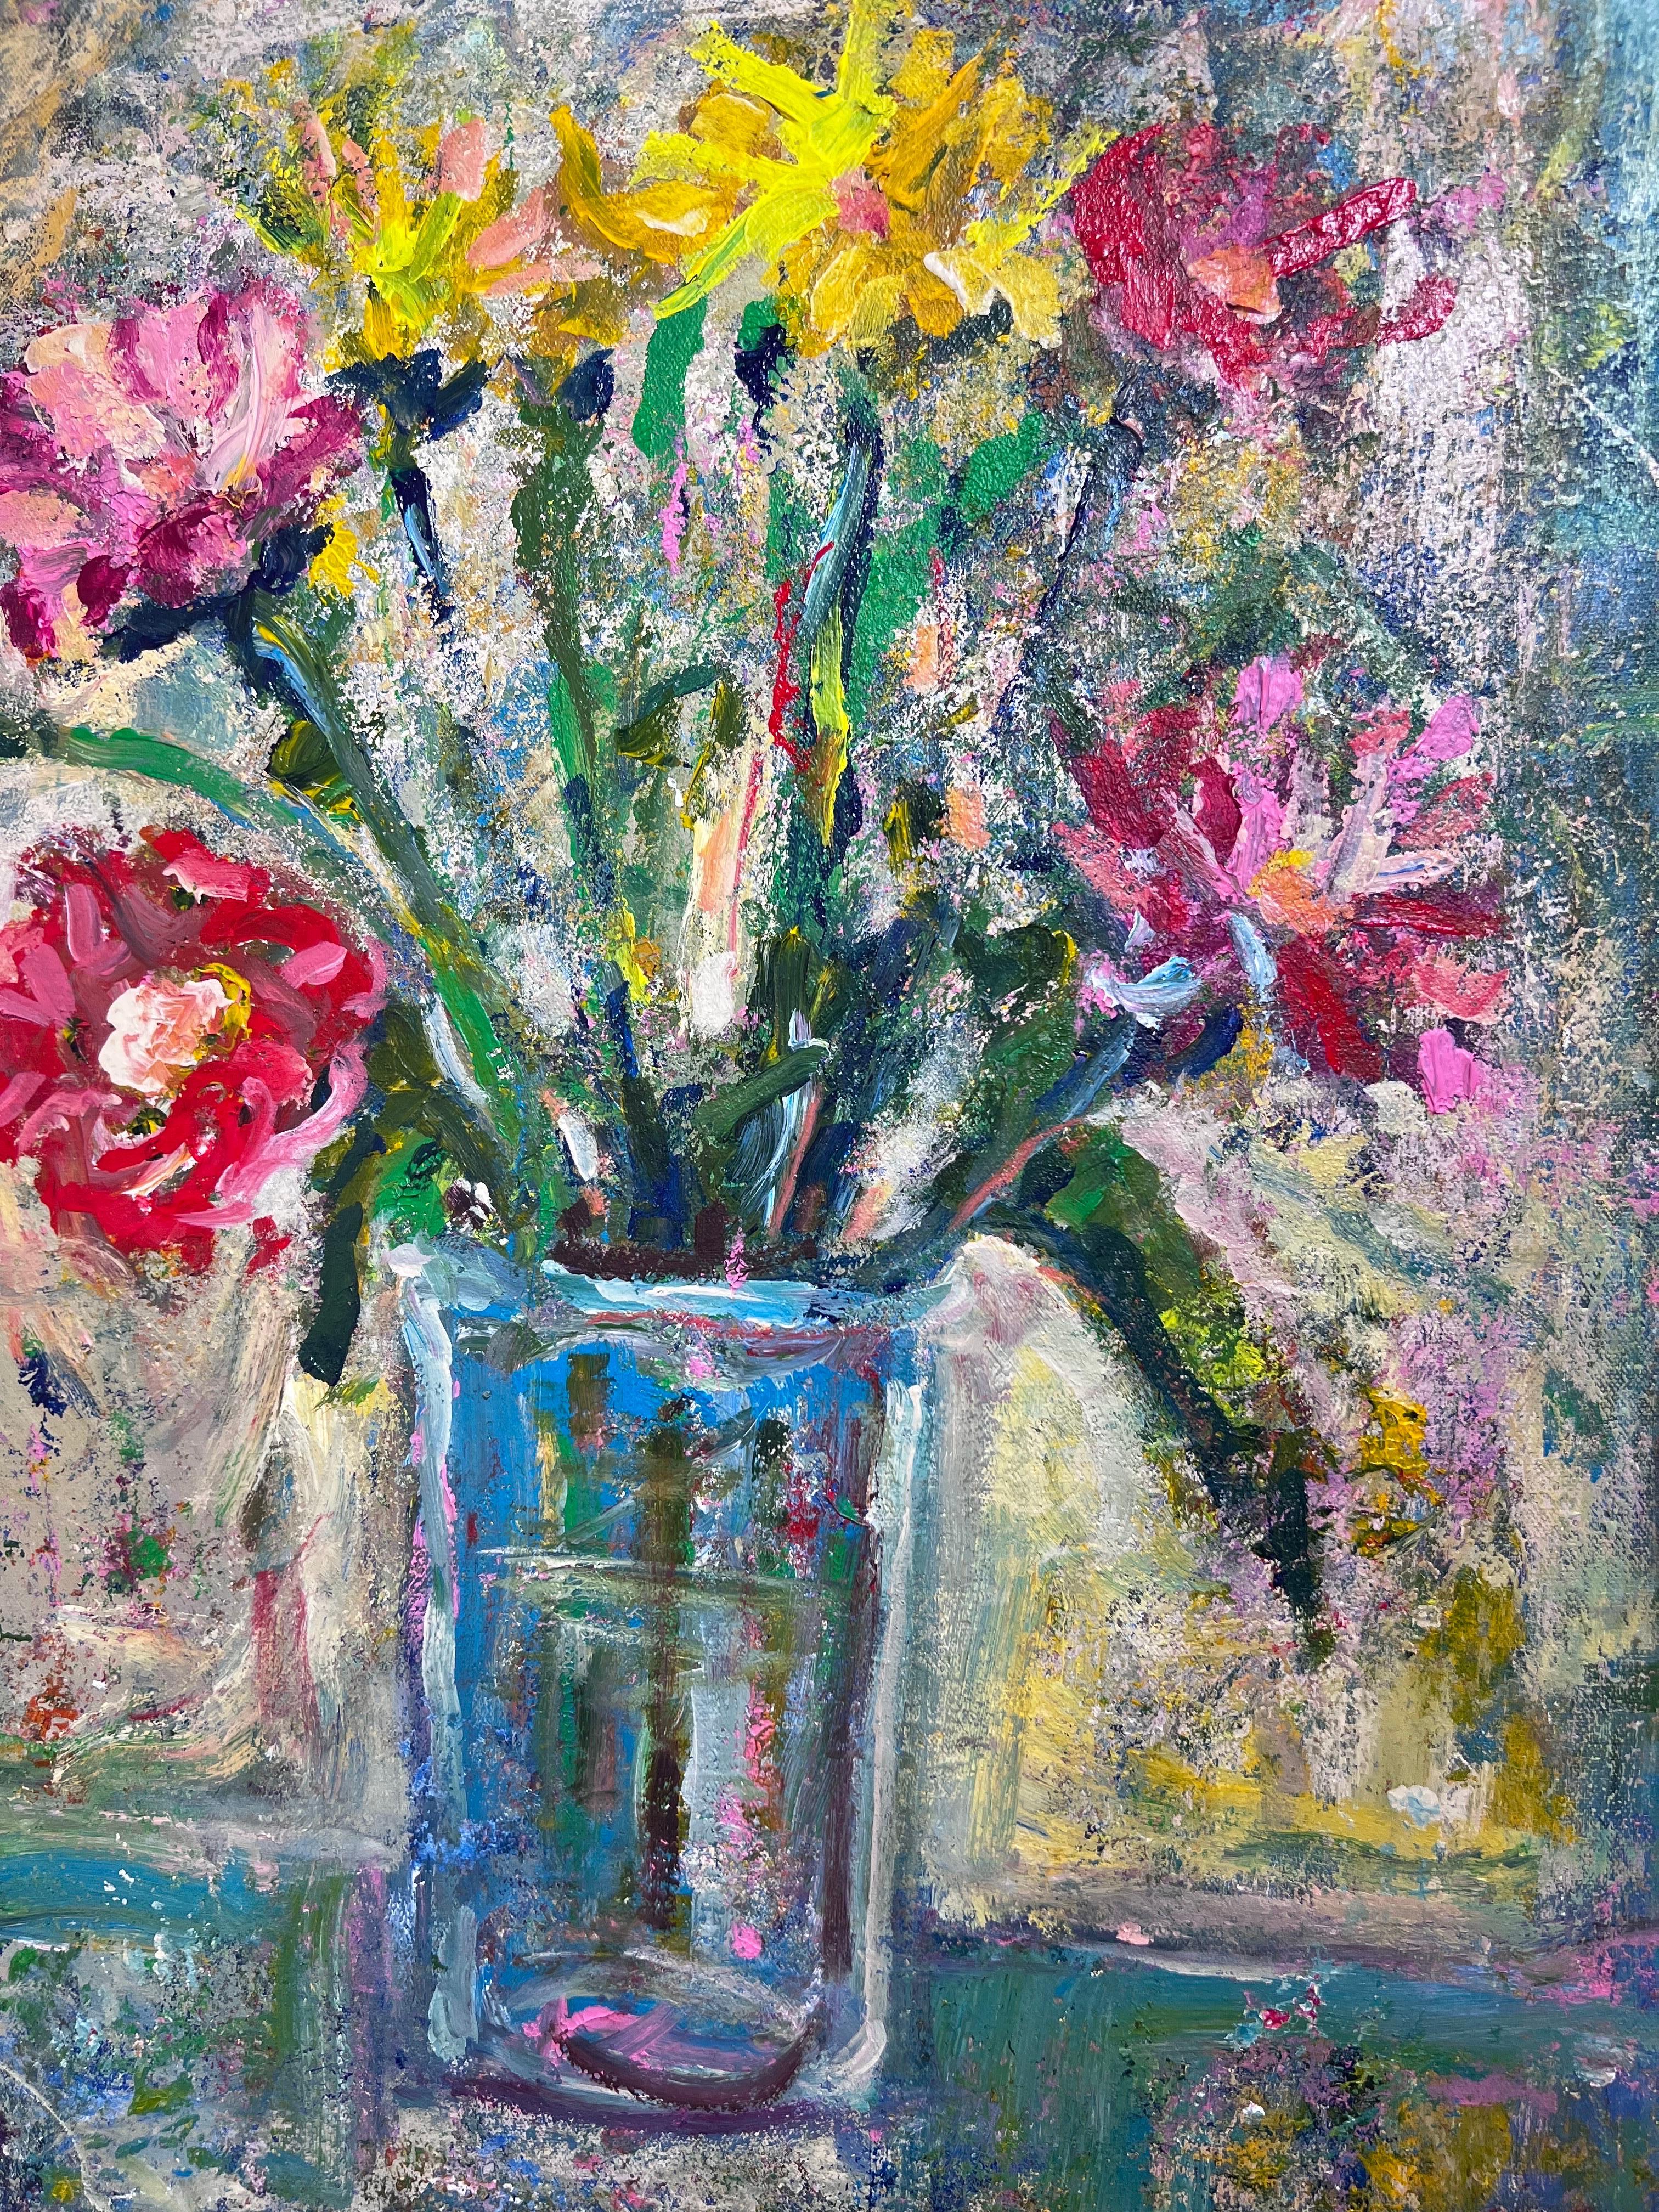 Happy bouquet  - Painting by Olavo Multini